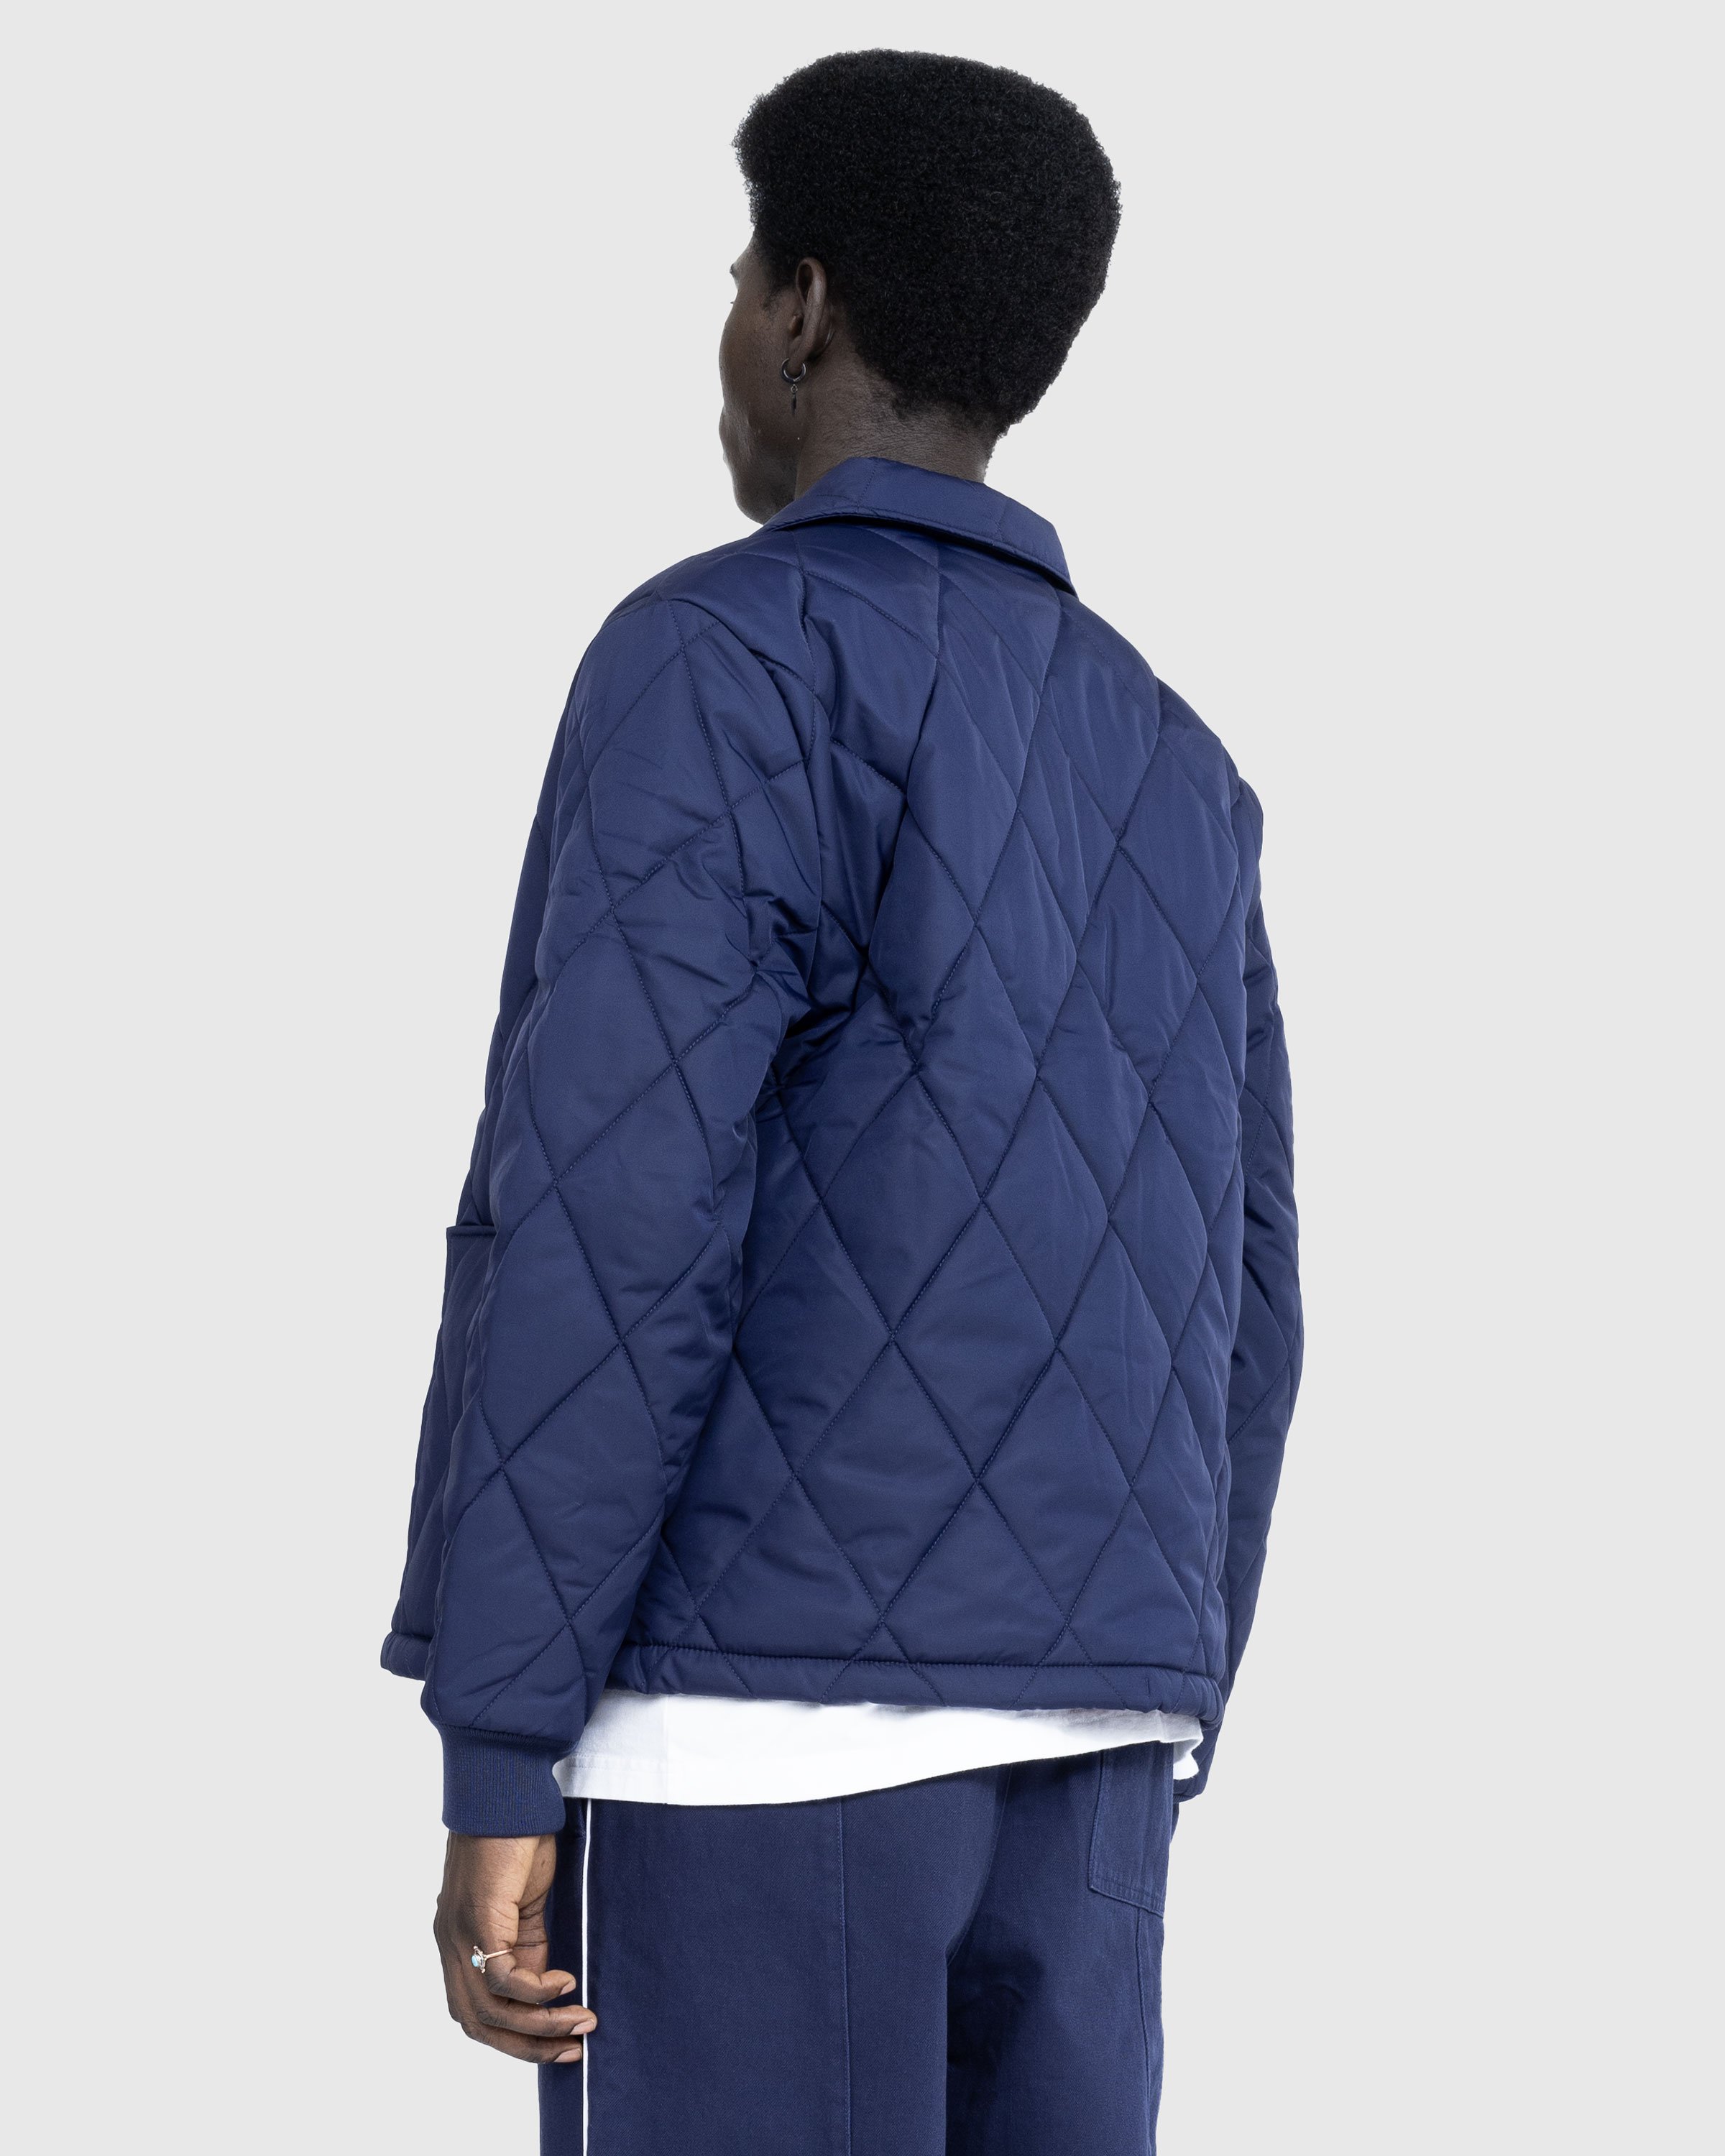 Puma x Noah - Water-Repellent Quilted Jacket Navy - Clothing - Blue - Image 5